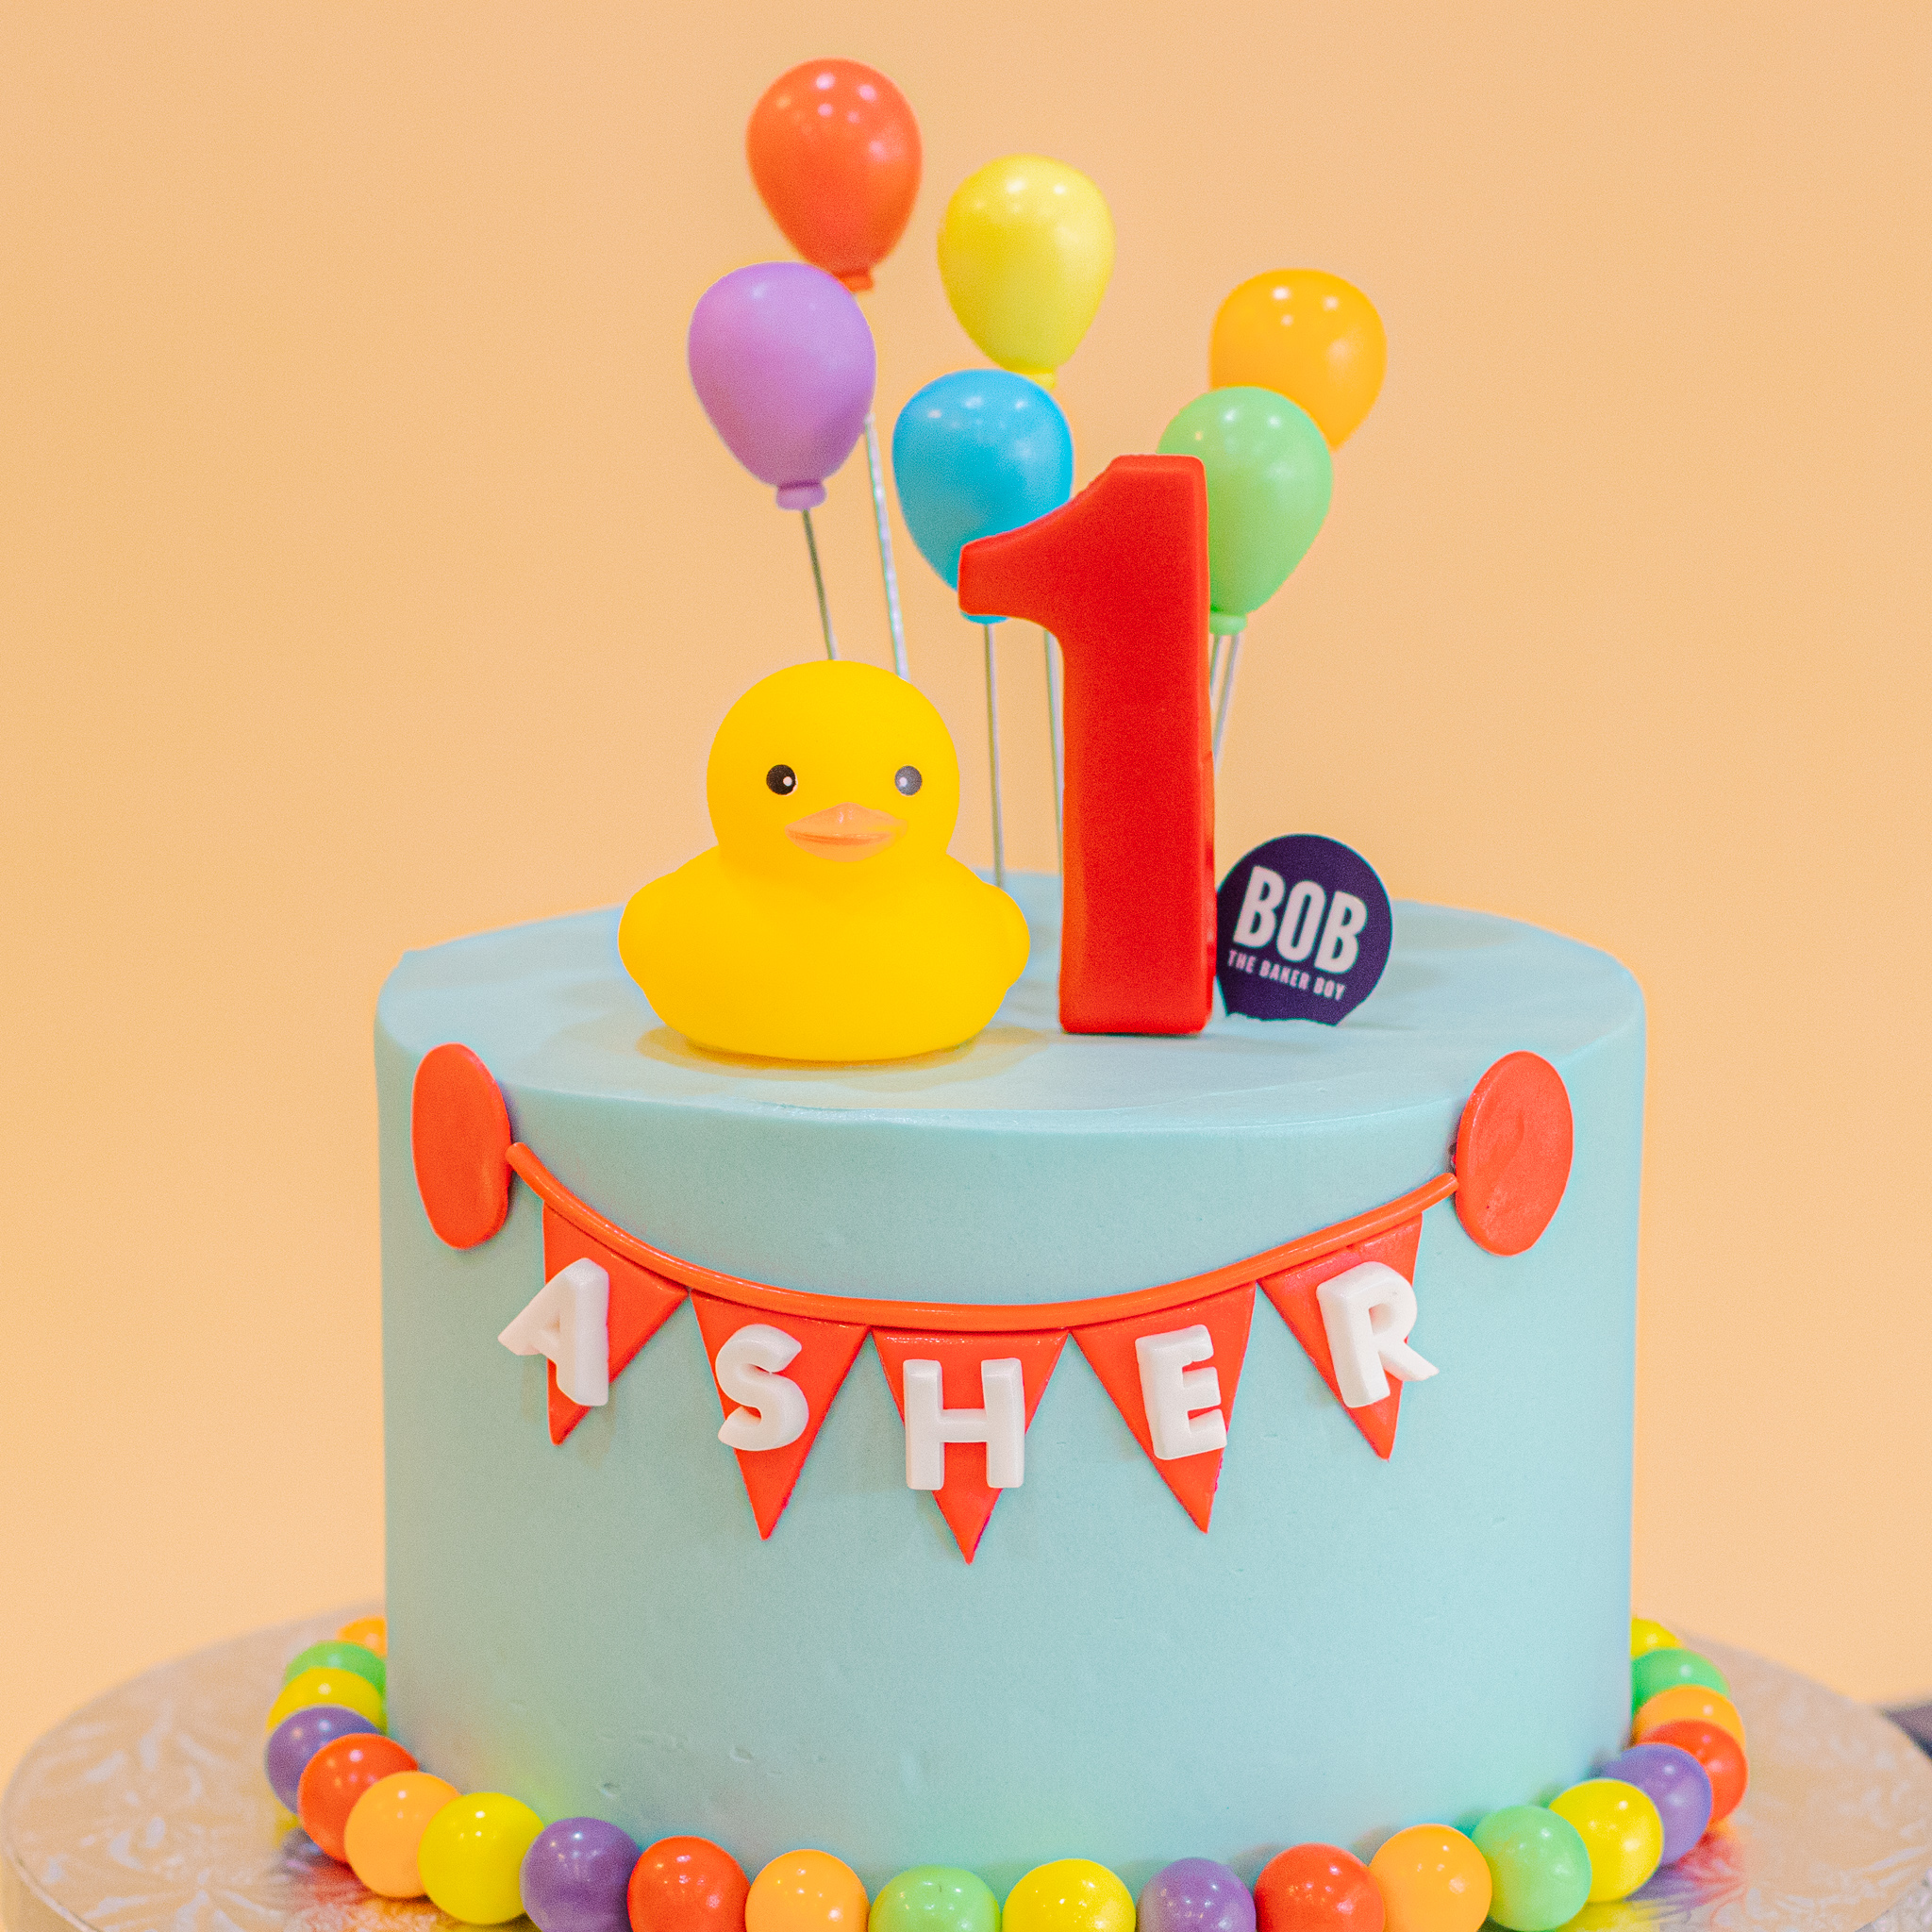 Rubber Duckie Cake with Colourful Balloons